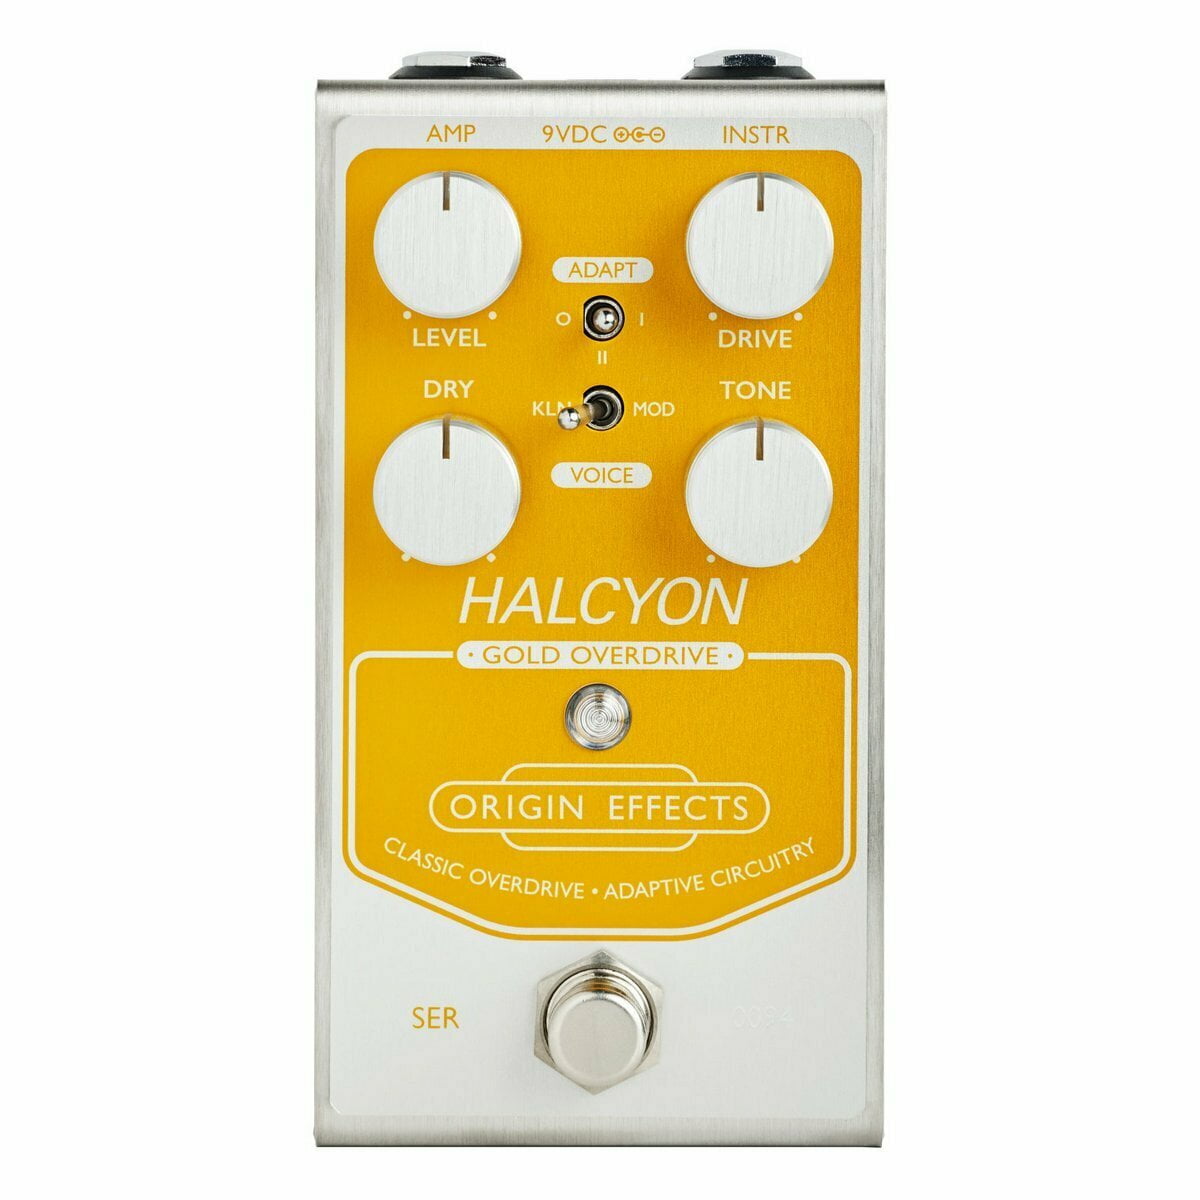 Origin Effects Halcyon Gold Overdrive Front (web) Off